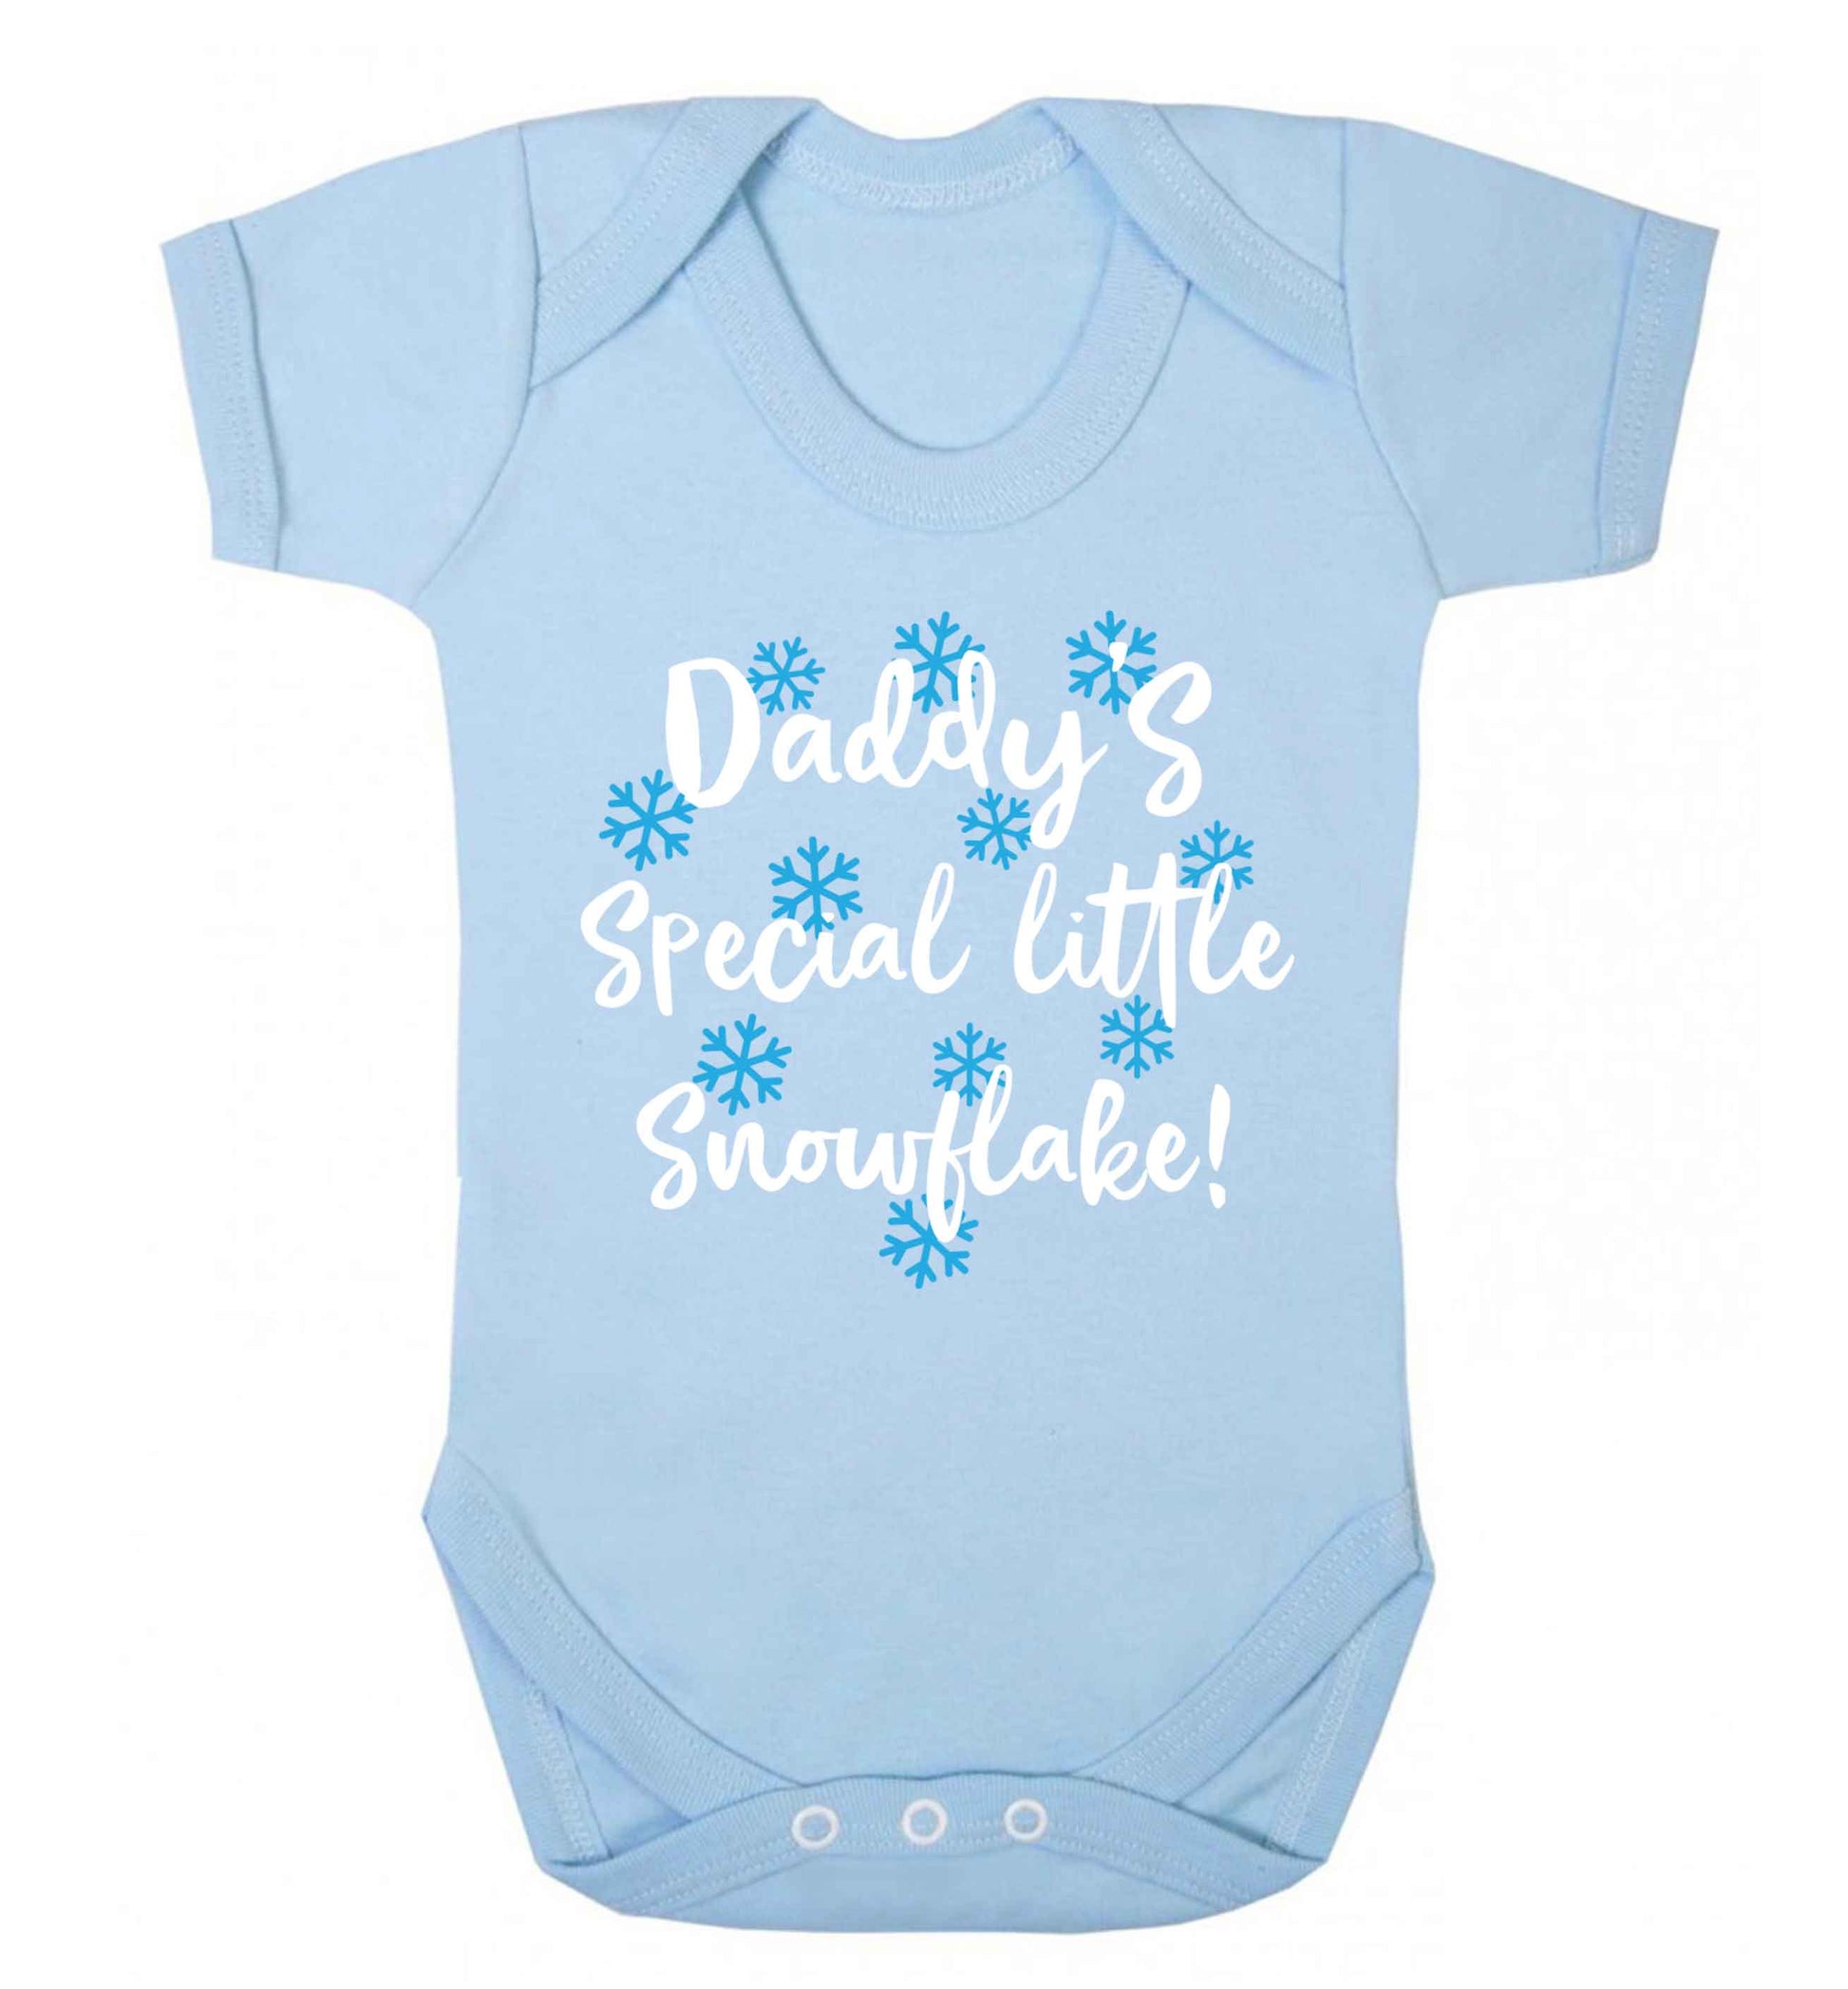 Daddy's special little snowflake Baby Vest pale blue 18-24 months